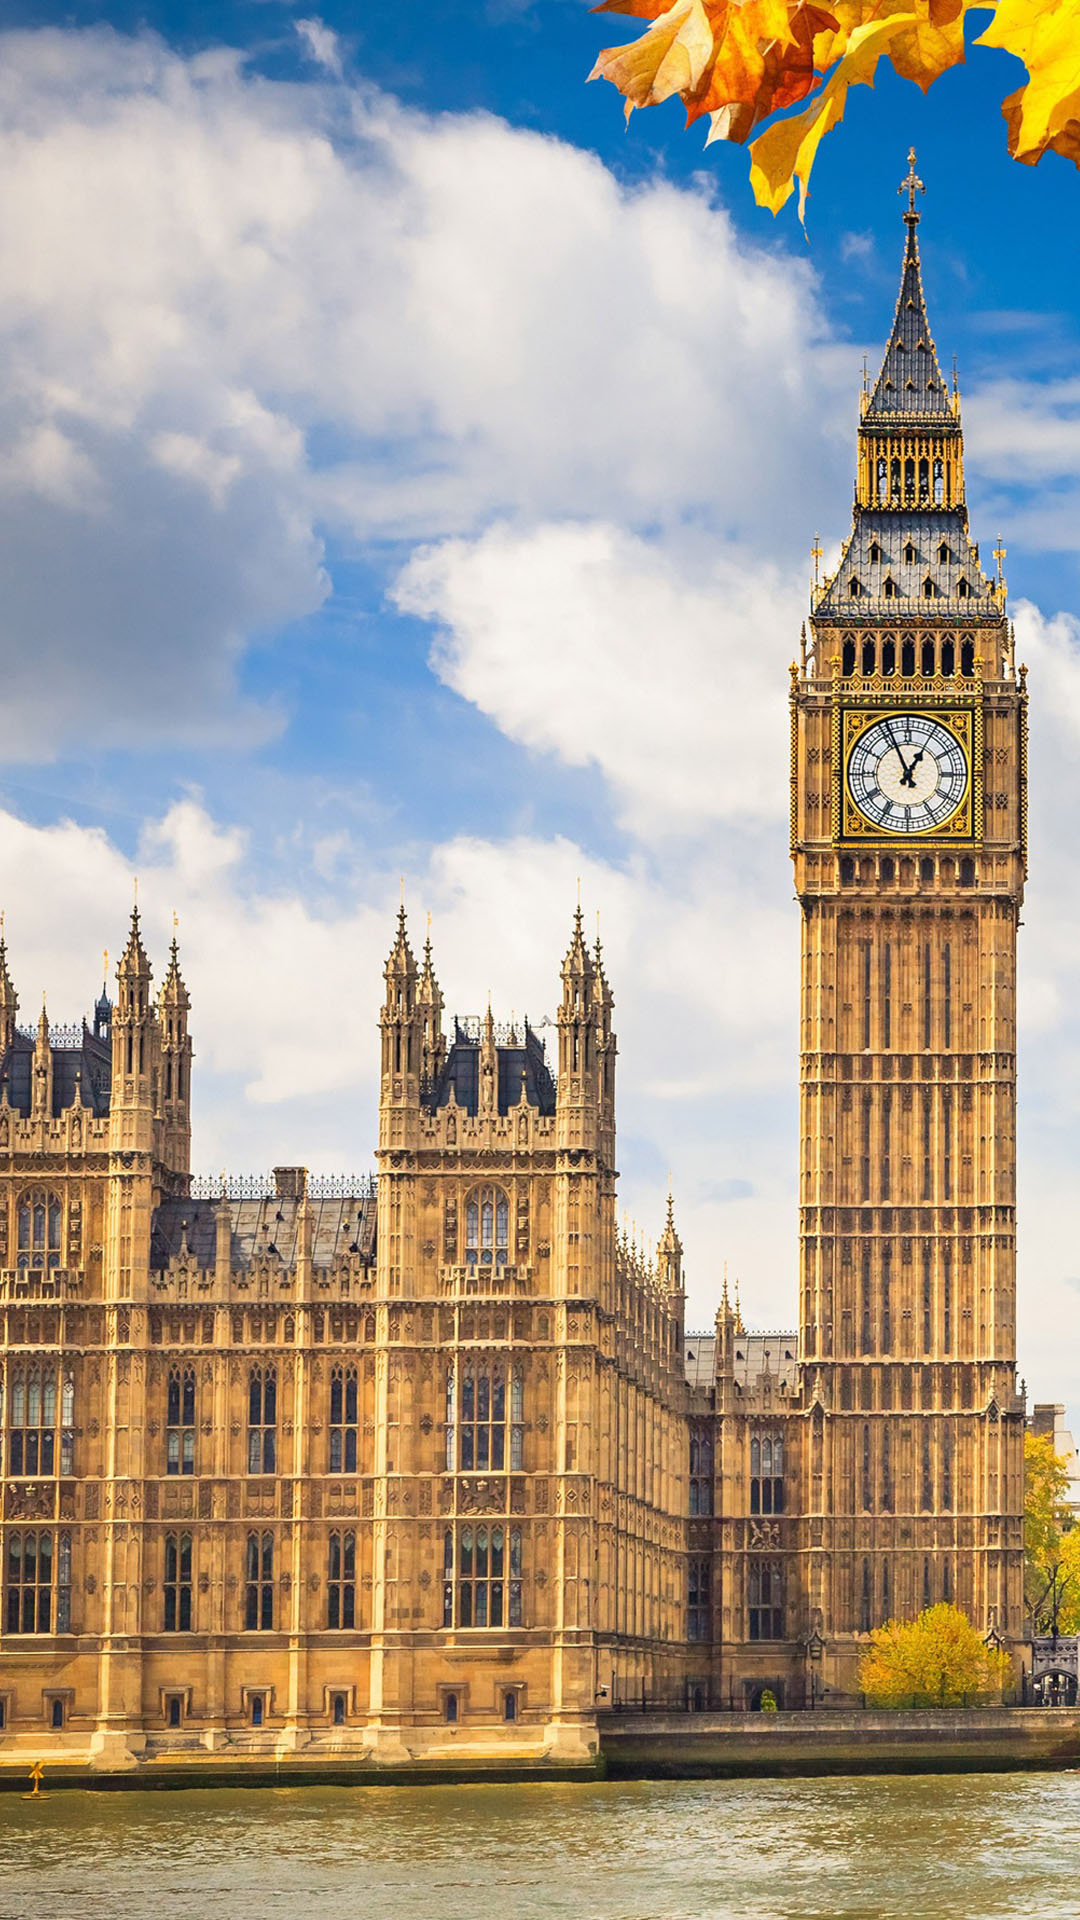 London and Big Ben, HTC One wallpaper, Desktop mobile tablet, Stunning imagery, 1080x1920 Full HD Phone